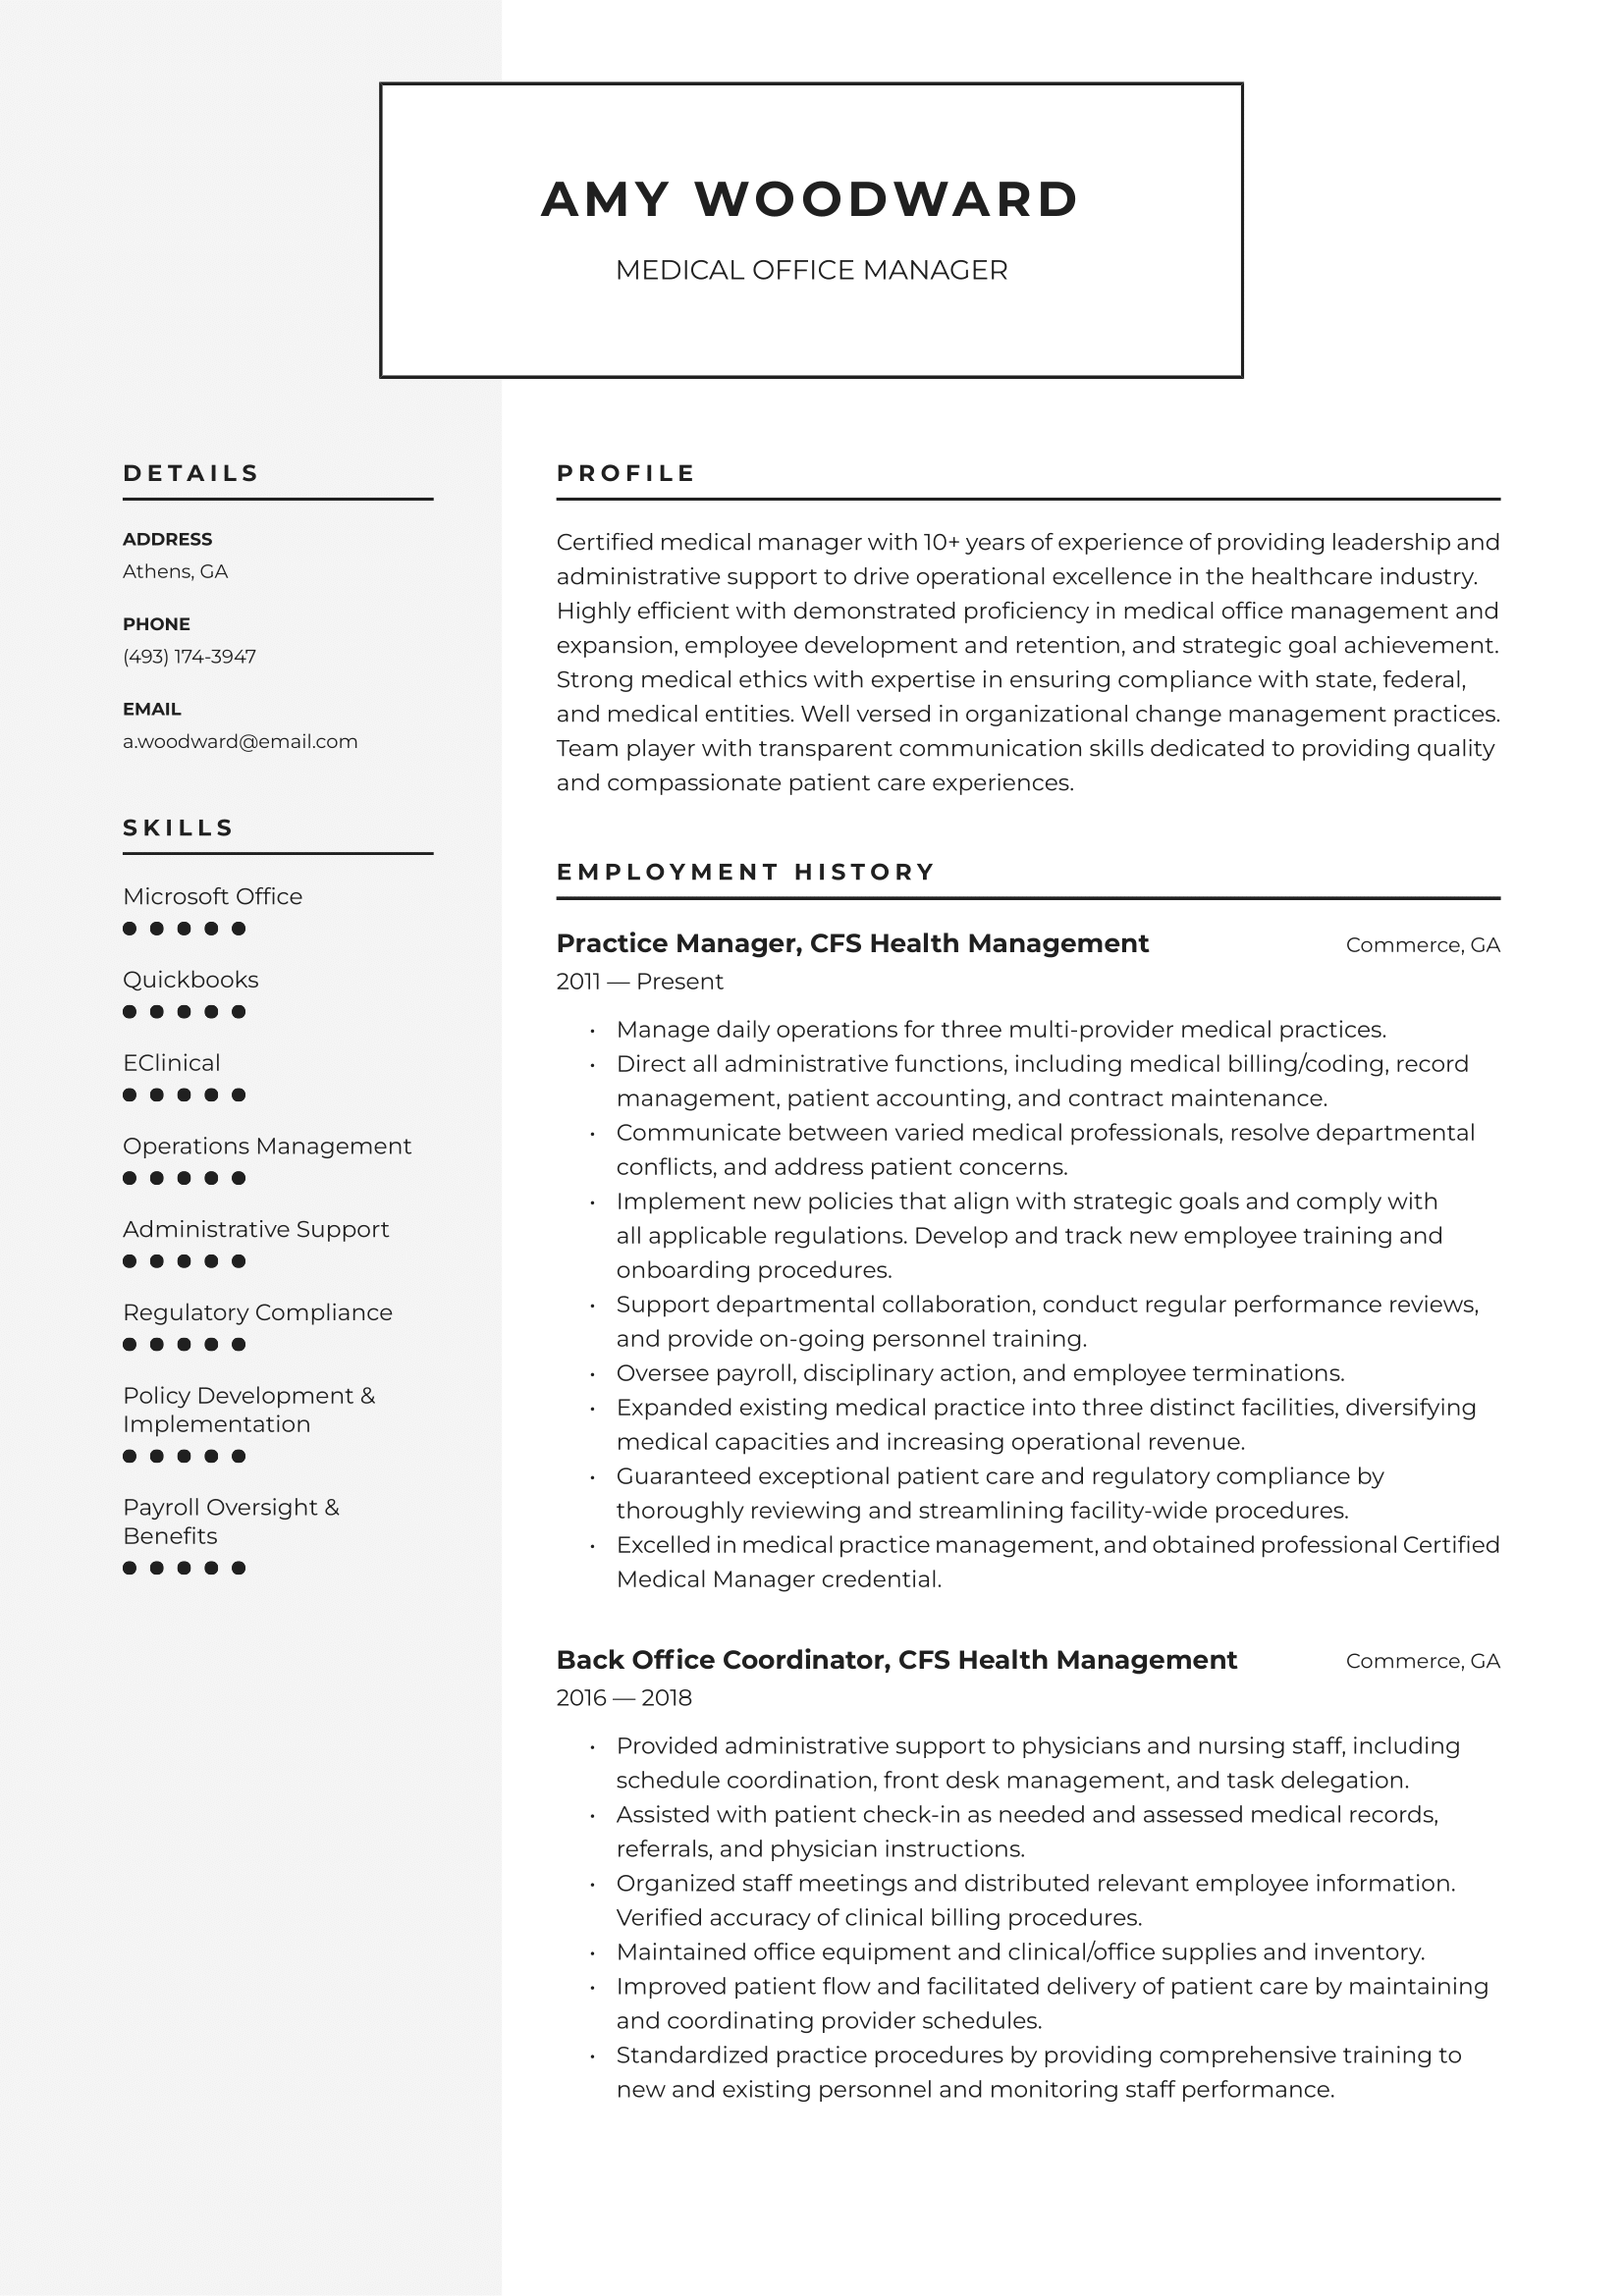 Medical Officer Manager Resume Example and Writing Guide